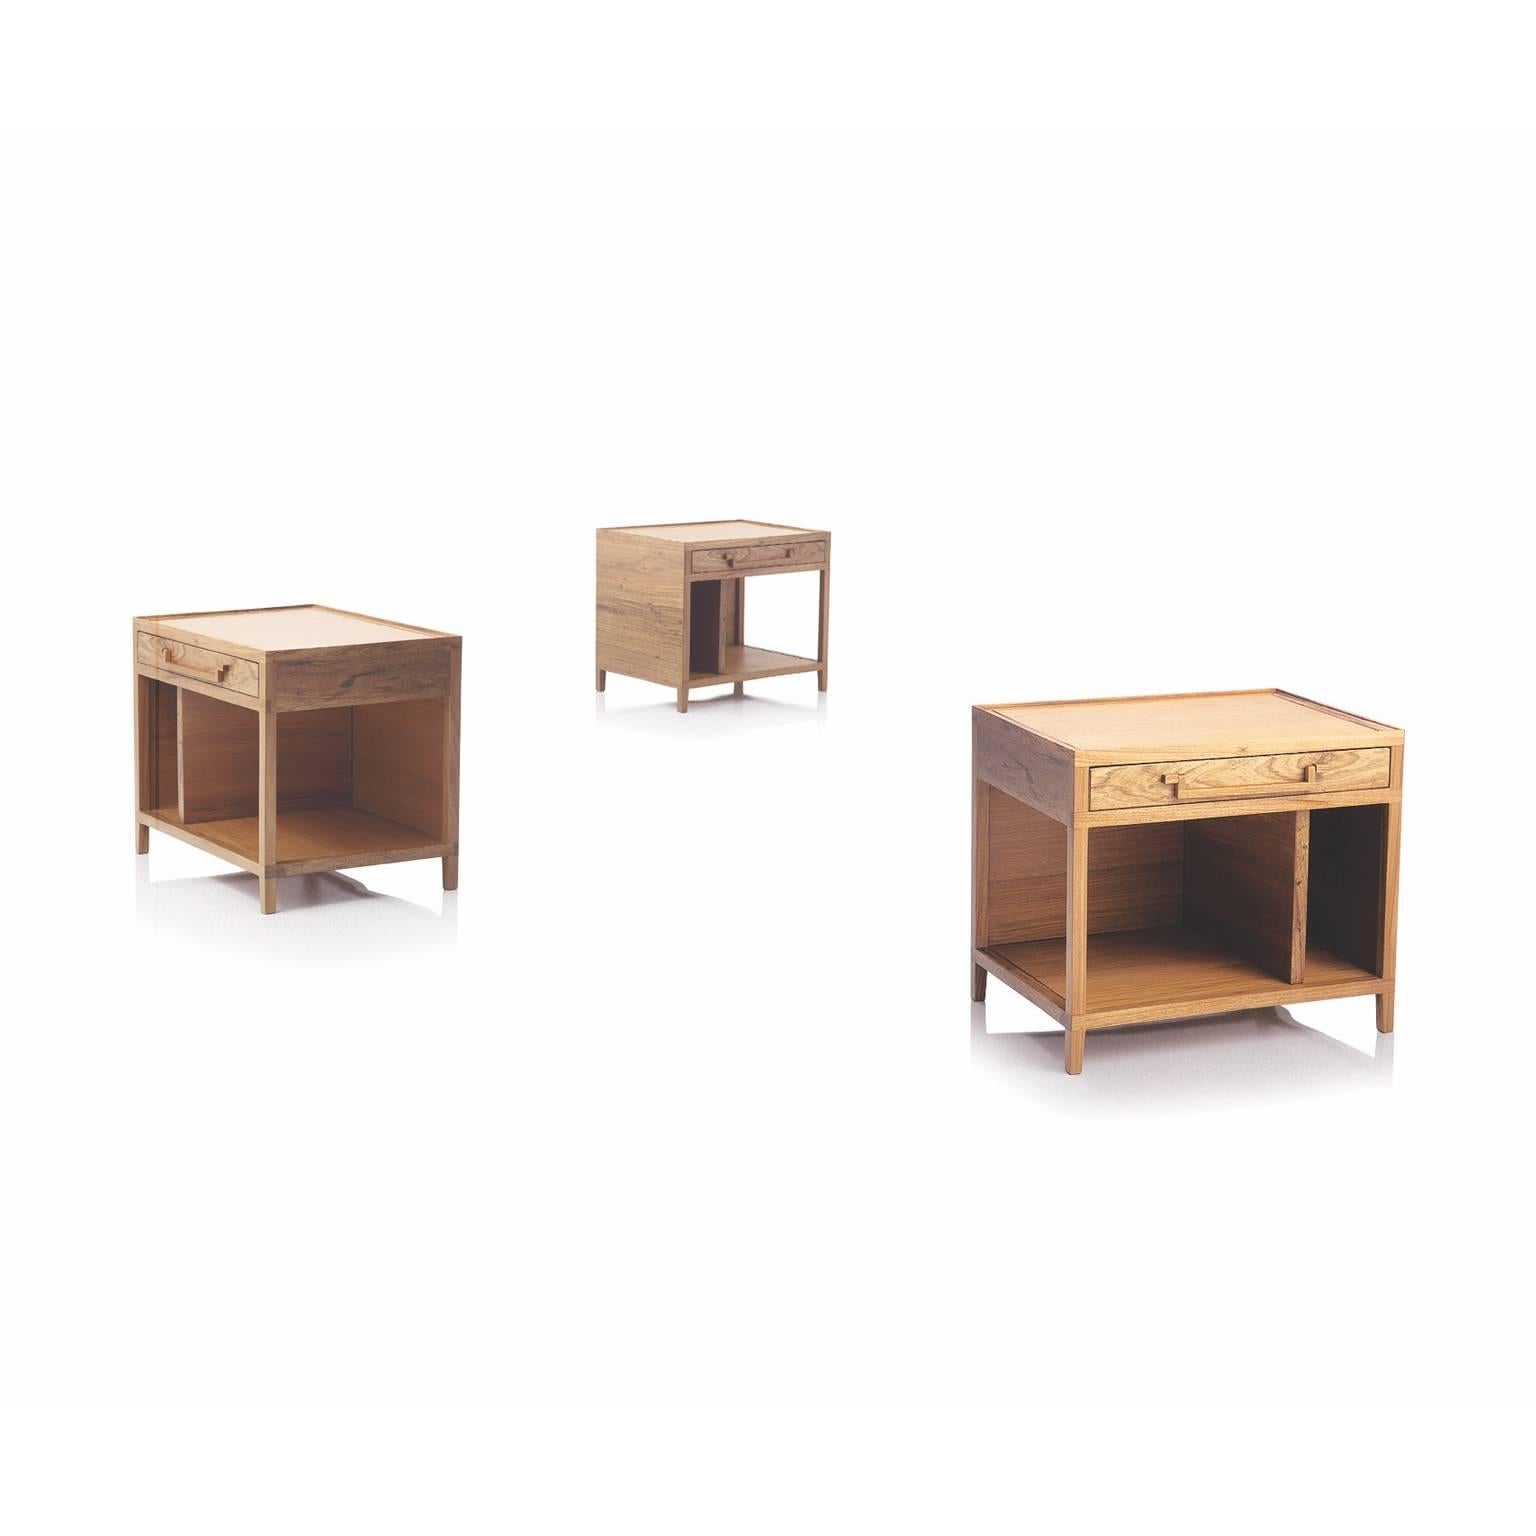 The side table Soliu structure is made in solid Brazilian wood Freijó with traditional joint techniques. The tabletop and shelf is veneered with natural wood. The finishing is an Italian matte acrylic varnish that show the wood beauty: colors,